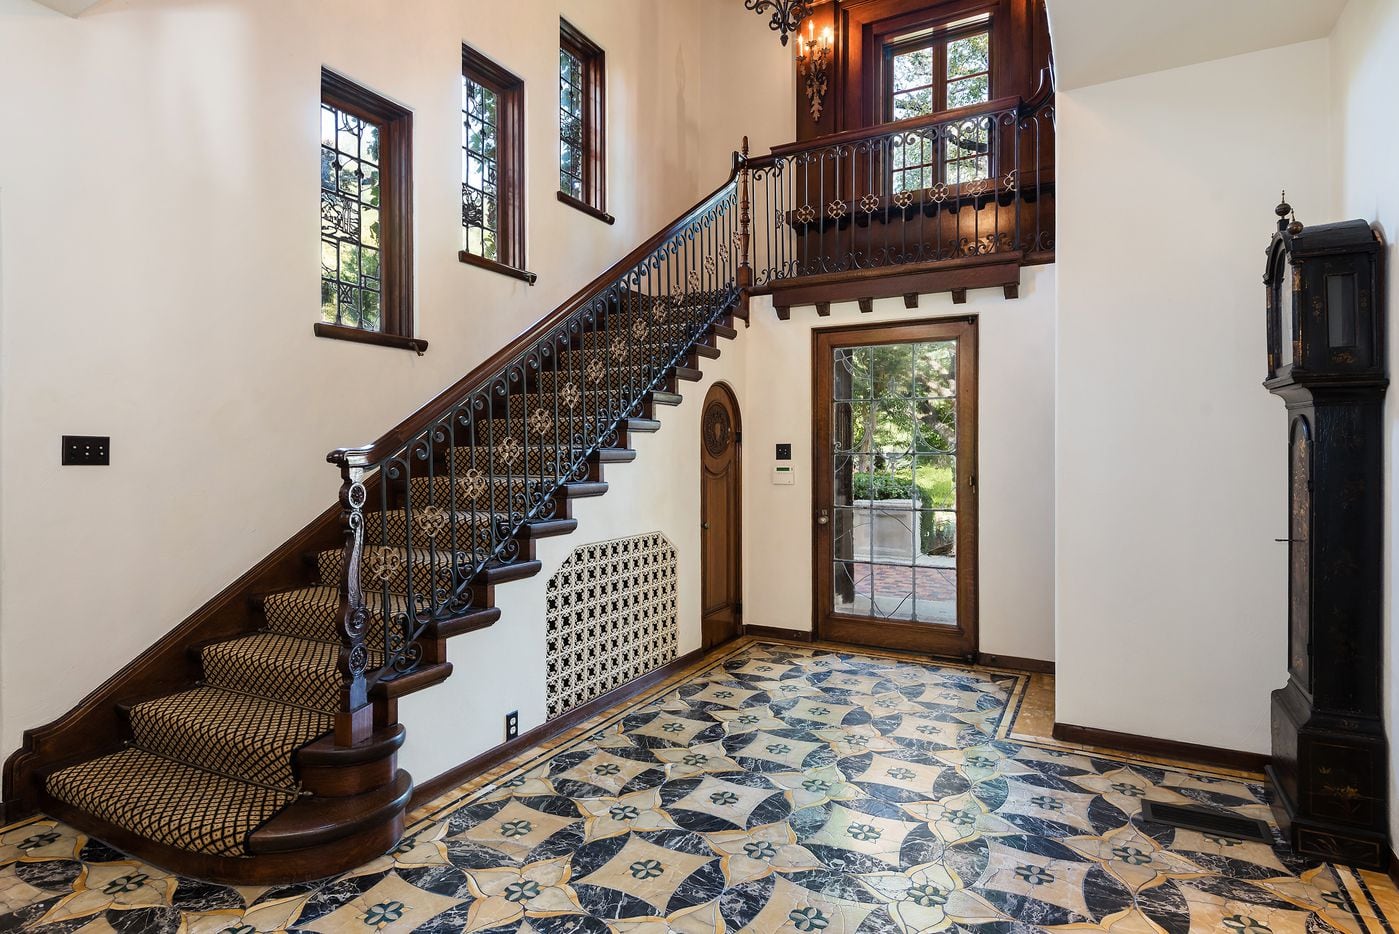 Take a look inside the home at 3601 Beverly Drive in Dallas, TX.